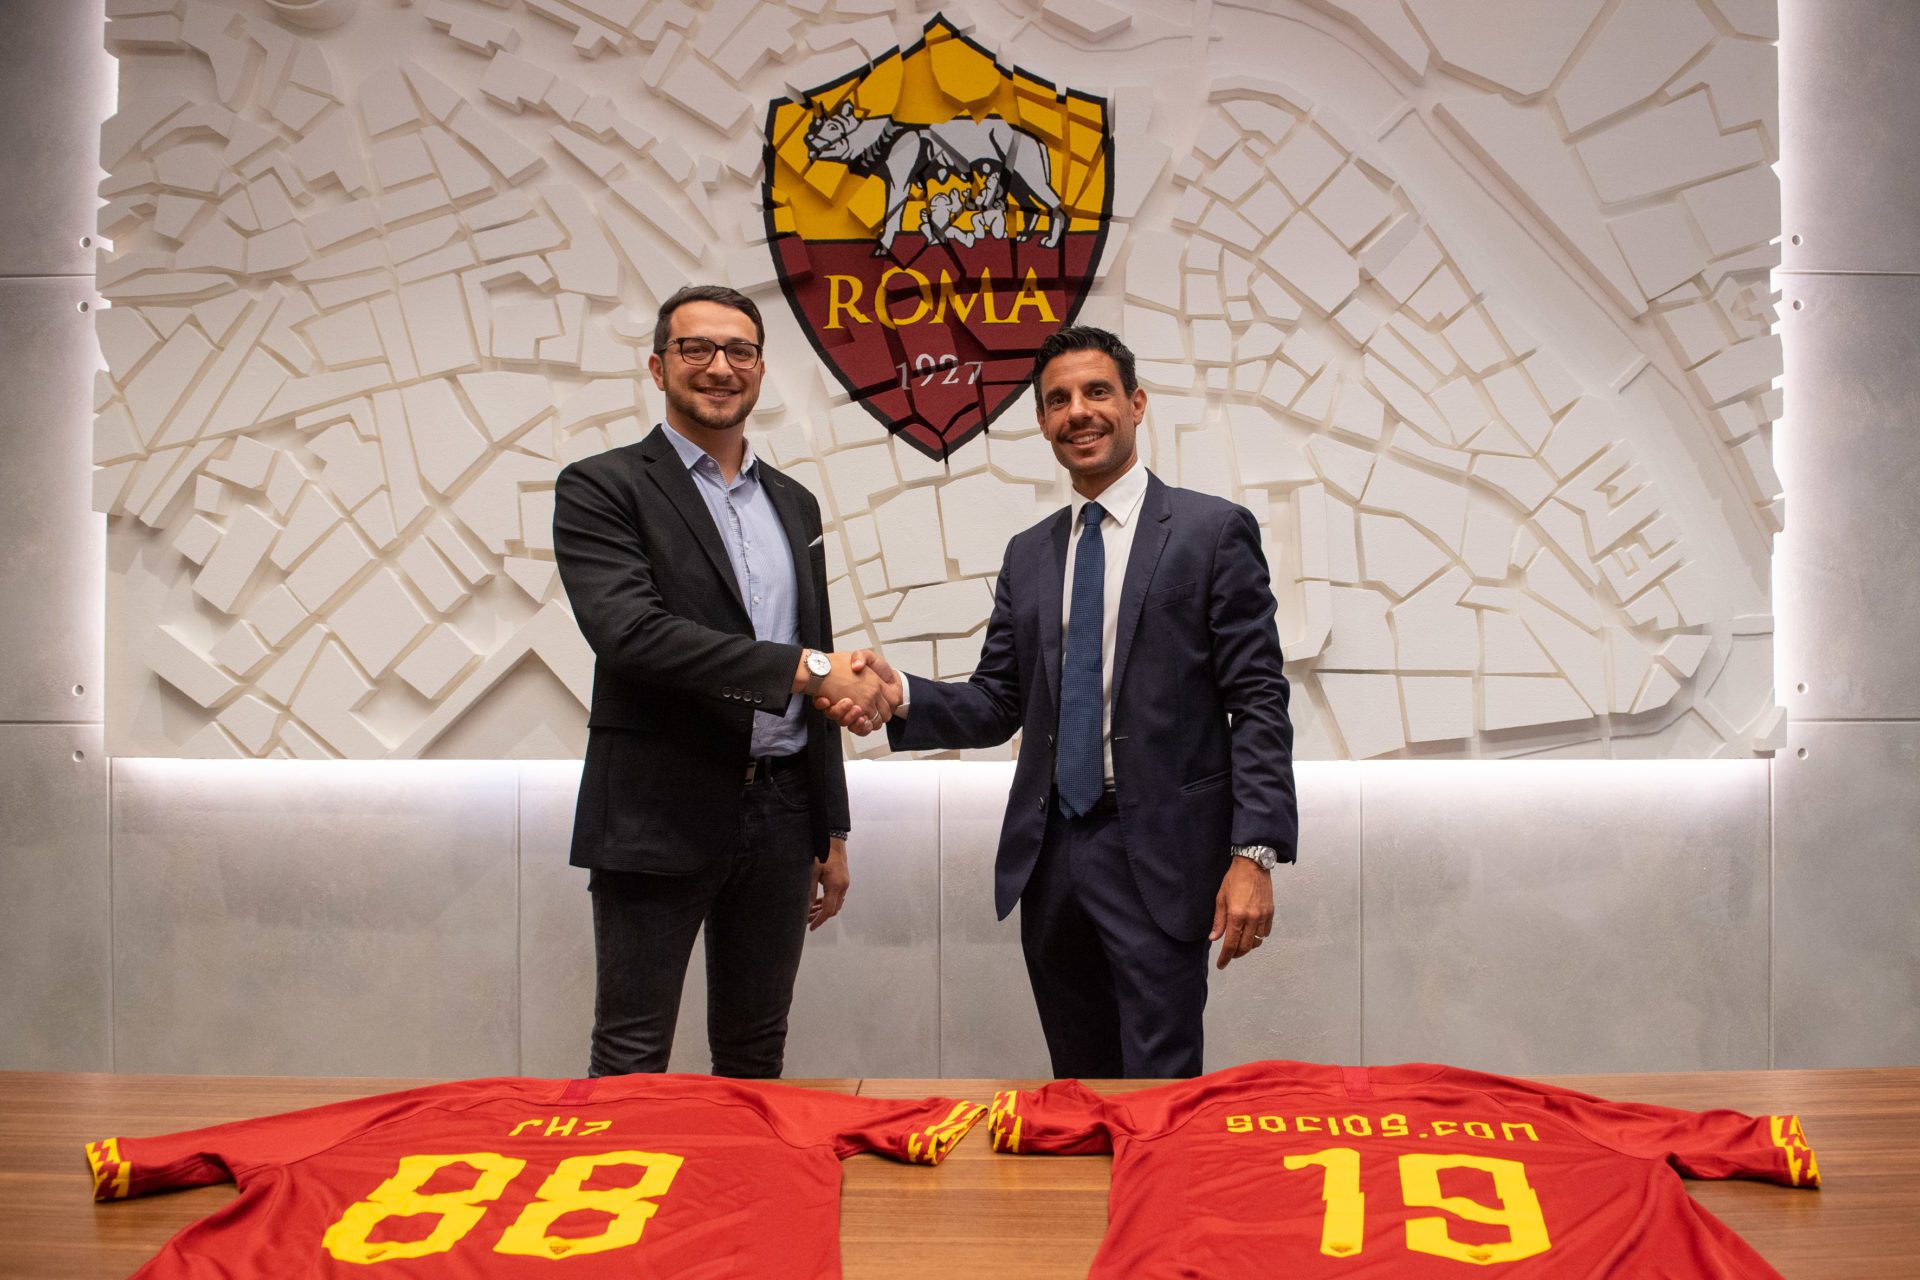 Chiliz to Be Official Cryptocurrency Partner of as Roma - Socios